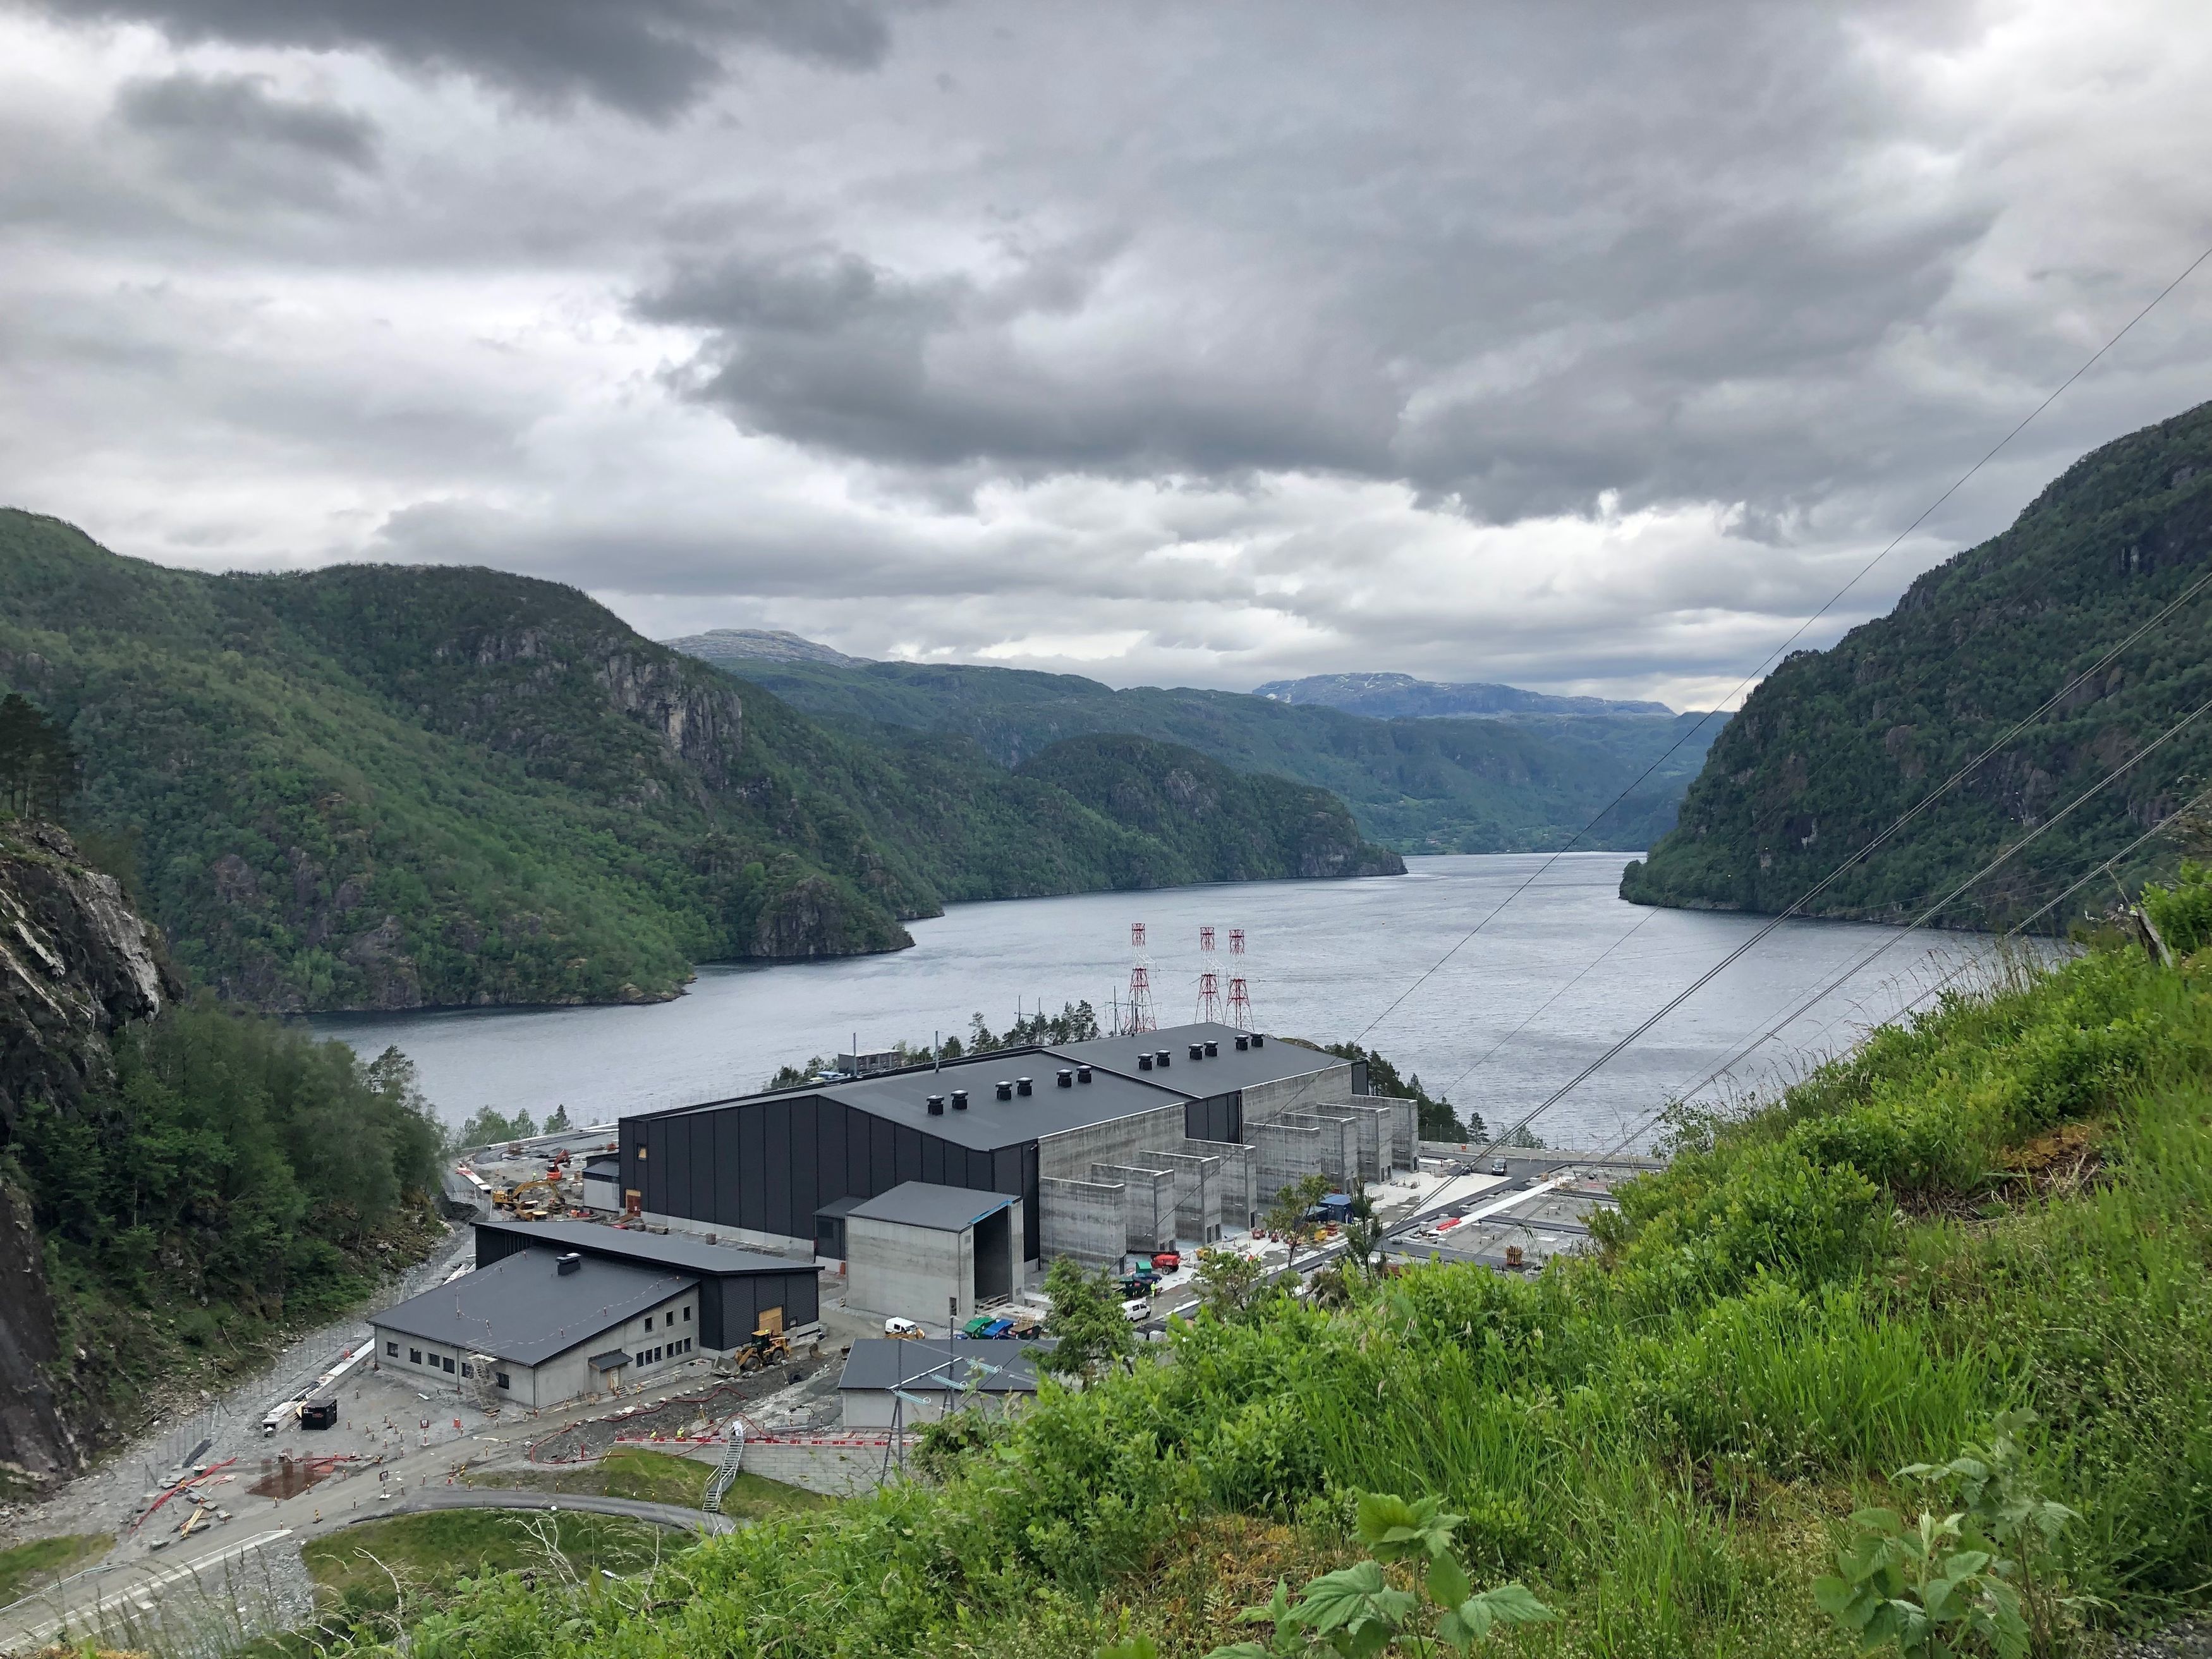 A converter power station is being built to help transmit electricity from Norway’s hydropower to the British grid, as water flowing from mountains to fjords in Norway will soon be helping power British homes, as the world’s longest “interconnector” hooks up the two countries’ grids. PRESS ASSOCIATION Photo. Picture date: Friday June 21, 2019.